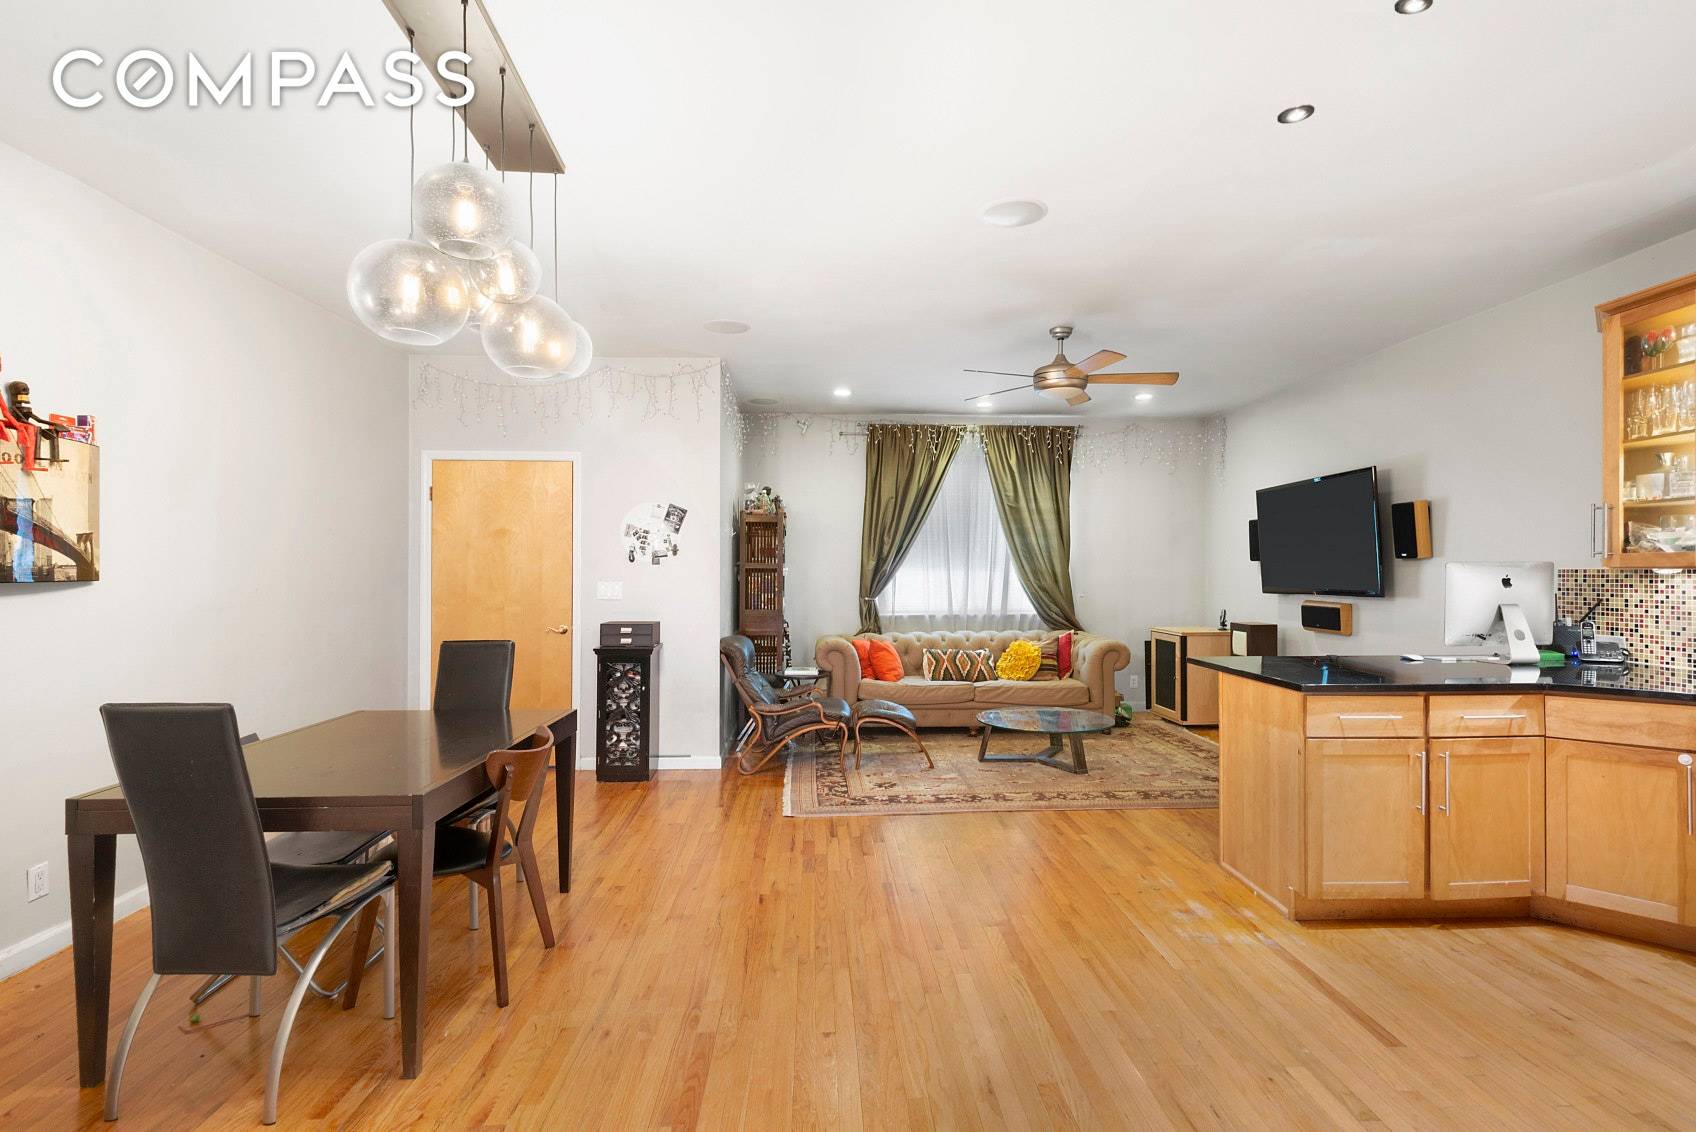 Massive two bedroom in the heart of Clinton Hill Upon entry into this apartment you will be welcomed by high ceilings allowing for natural sunlight to seep in along with ...